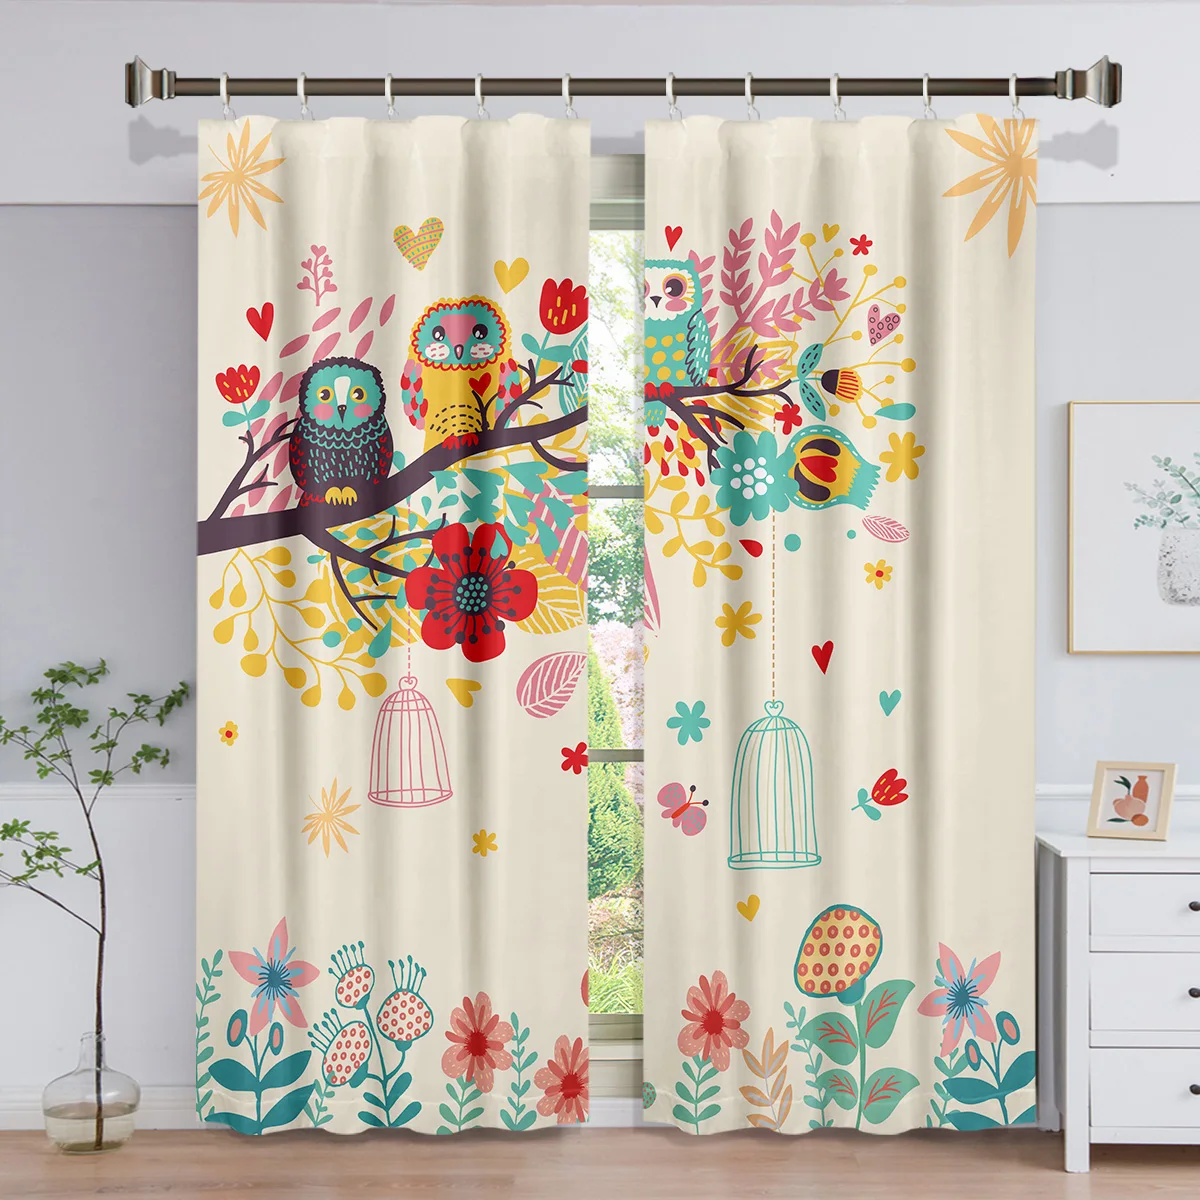 

Owl Colorful Branches 3D Digital Printing Bedroom Living Room Window Curtains 2 Panels Birds Print Curtain 3D Drapes